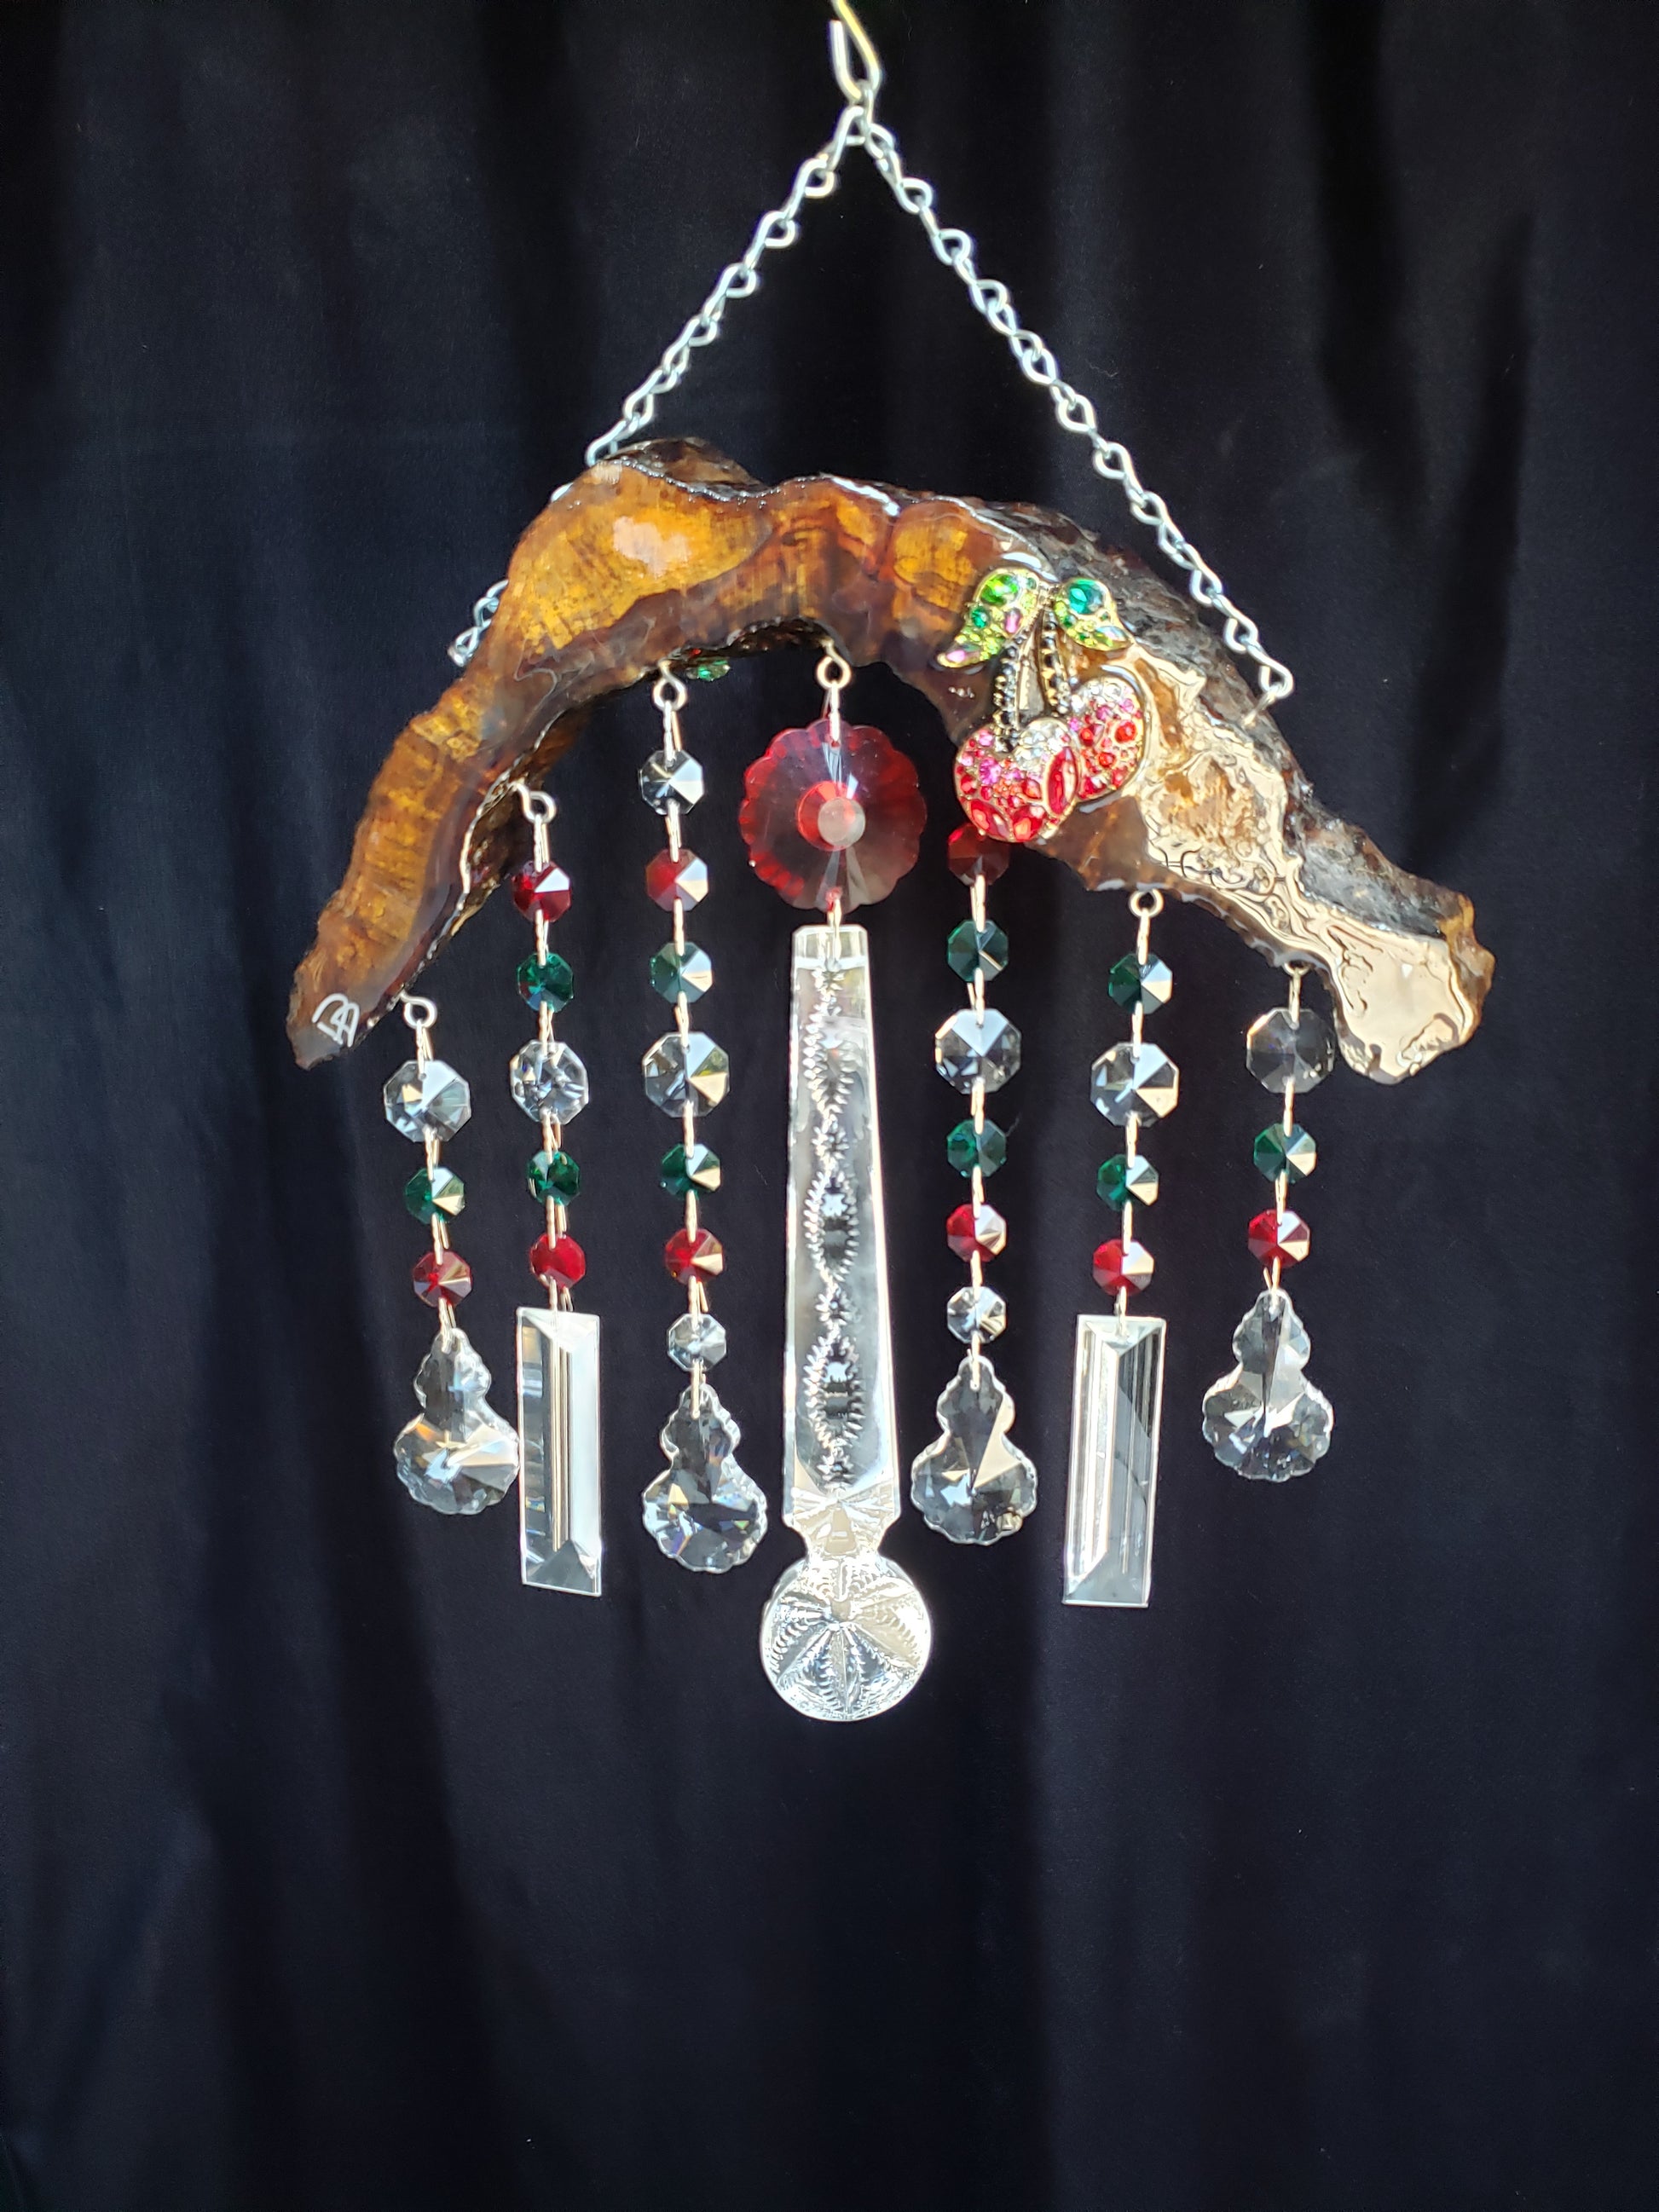 Unique gifts cherry inspired windchime sunactcher by Dazzling Driftwood Auburndale Florida